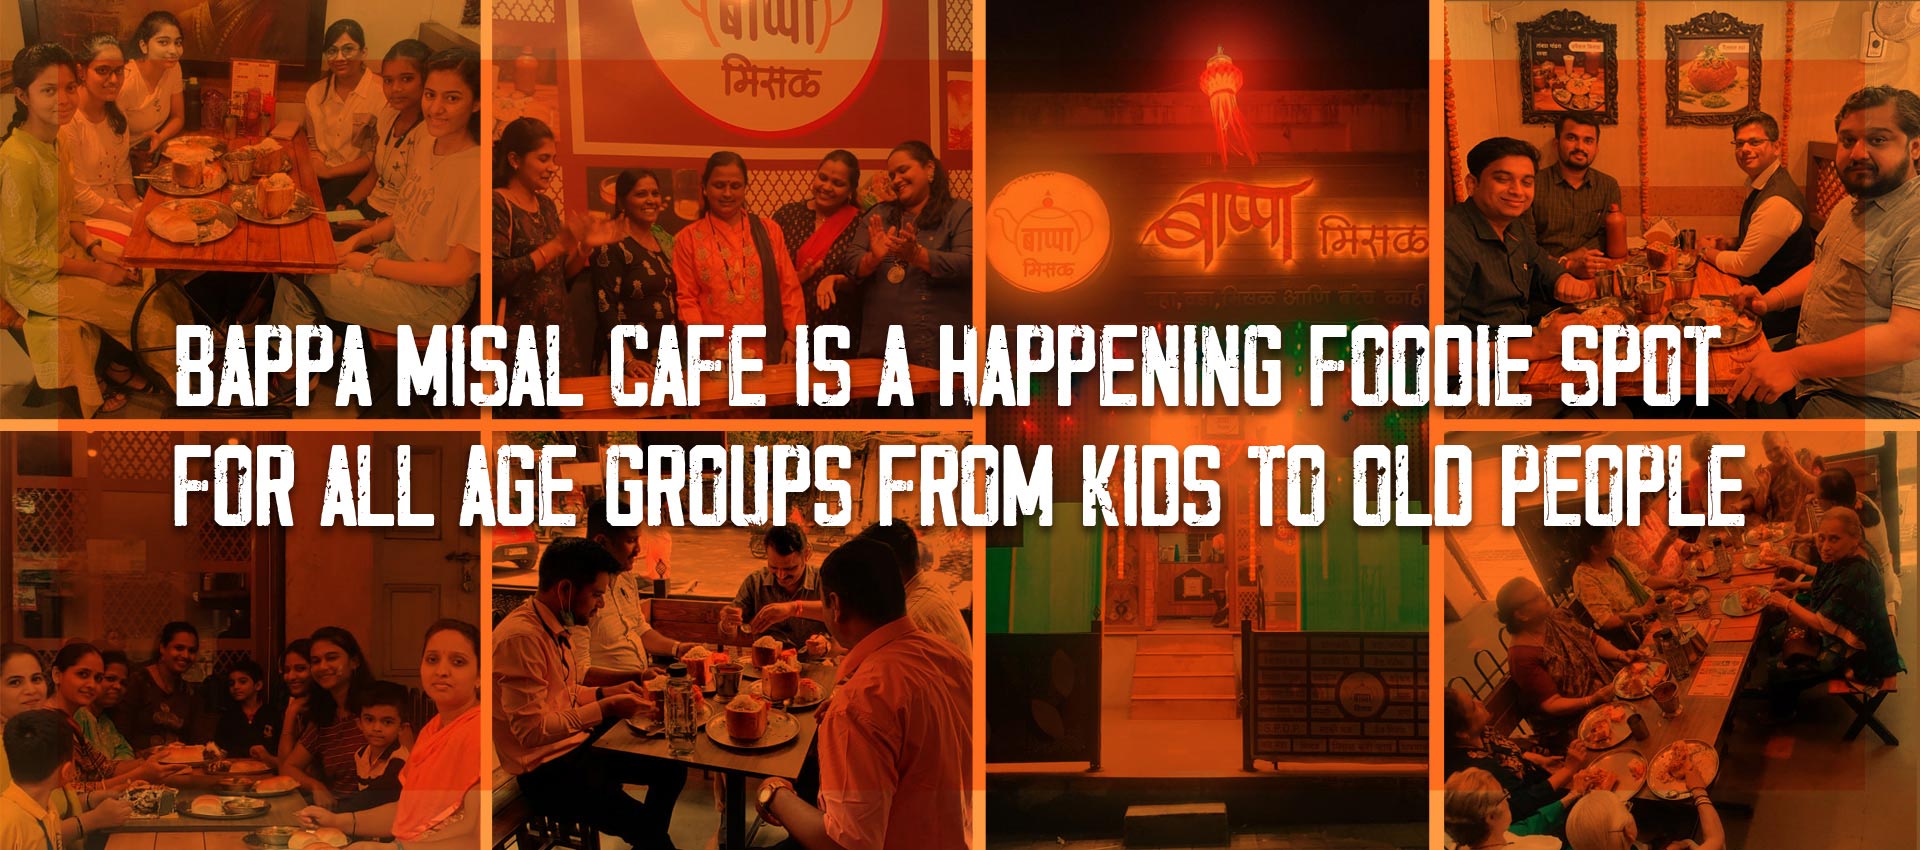 Bappa Misal Cafe id one of the best and famous foodie spot for all age generations.